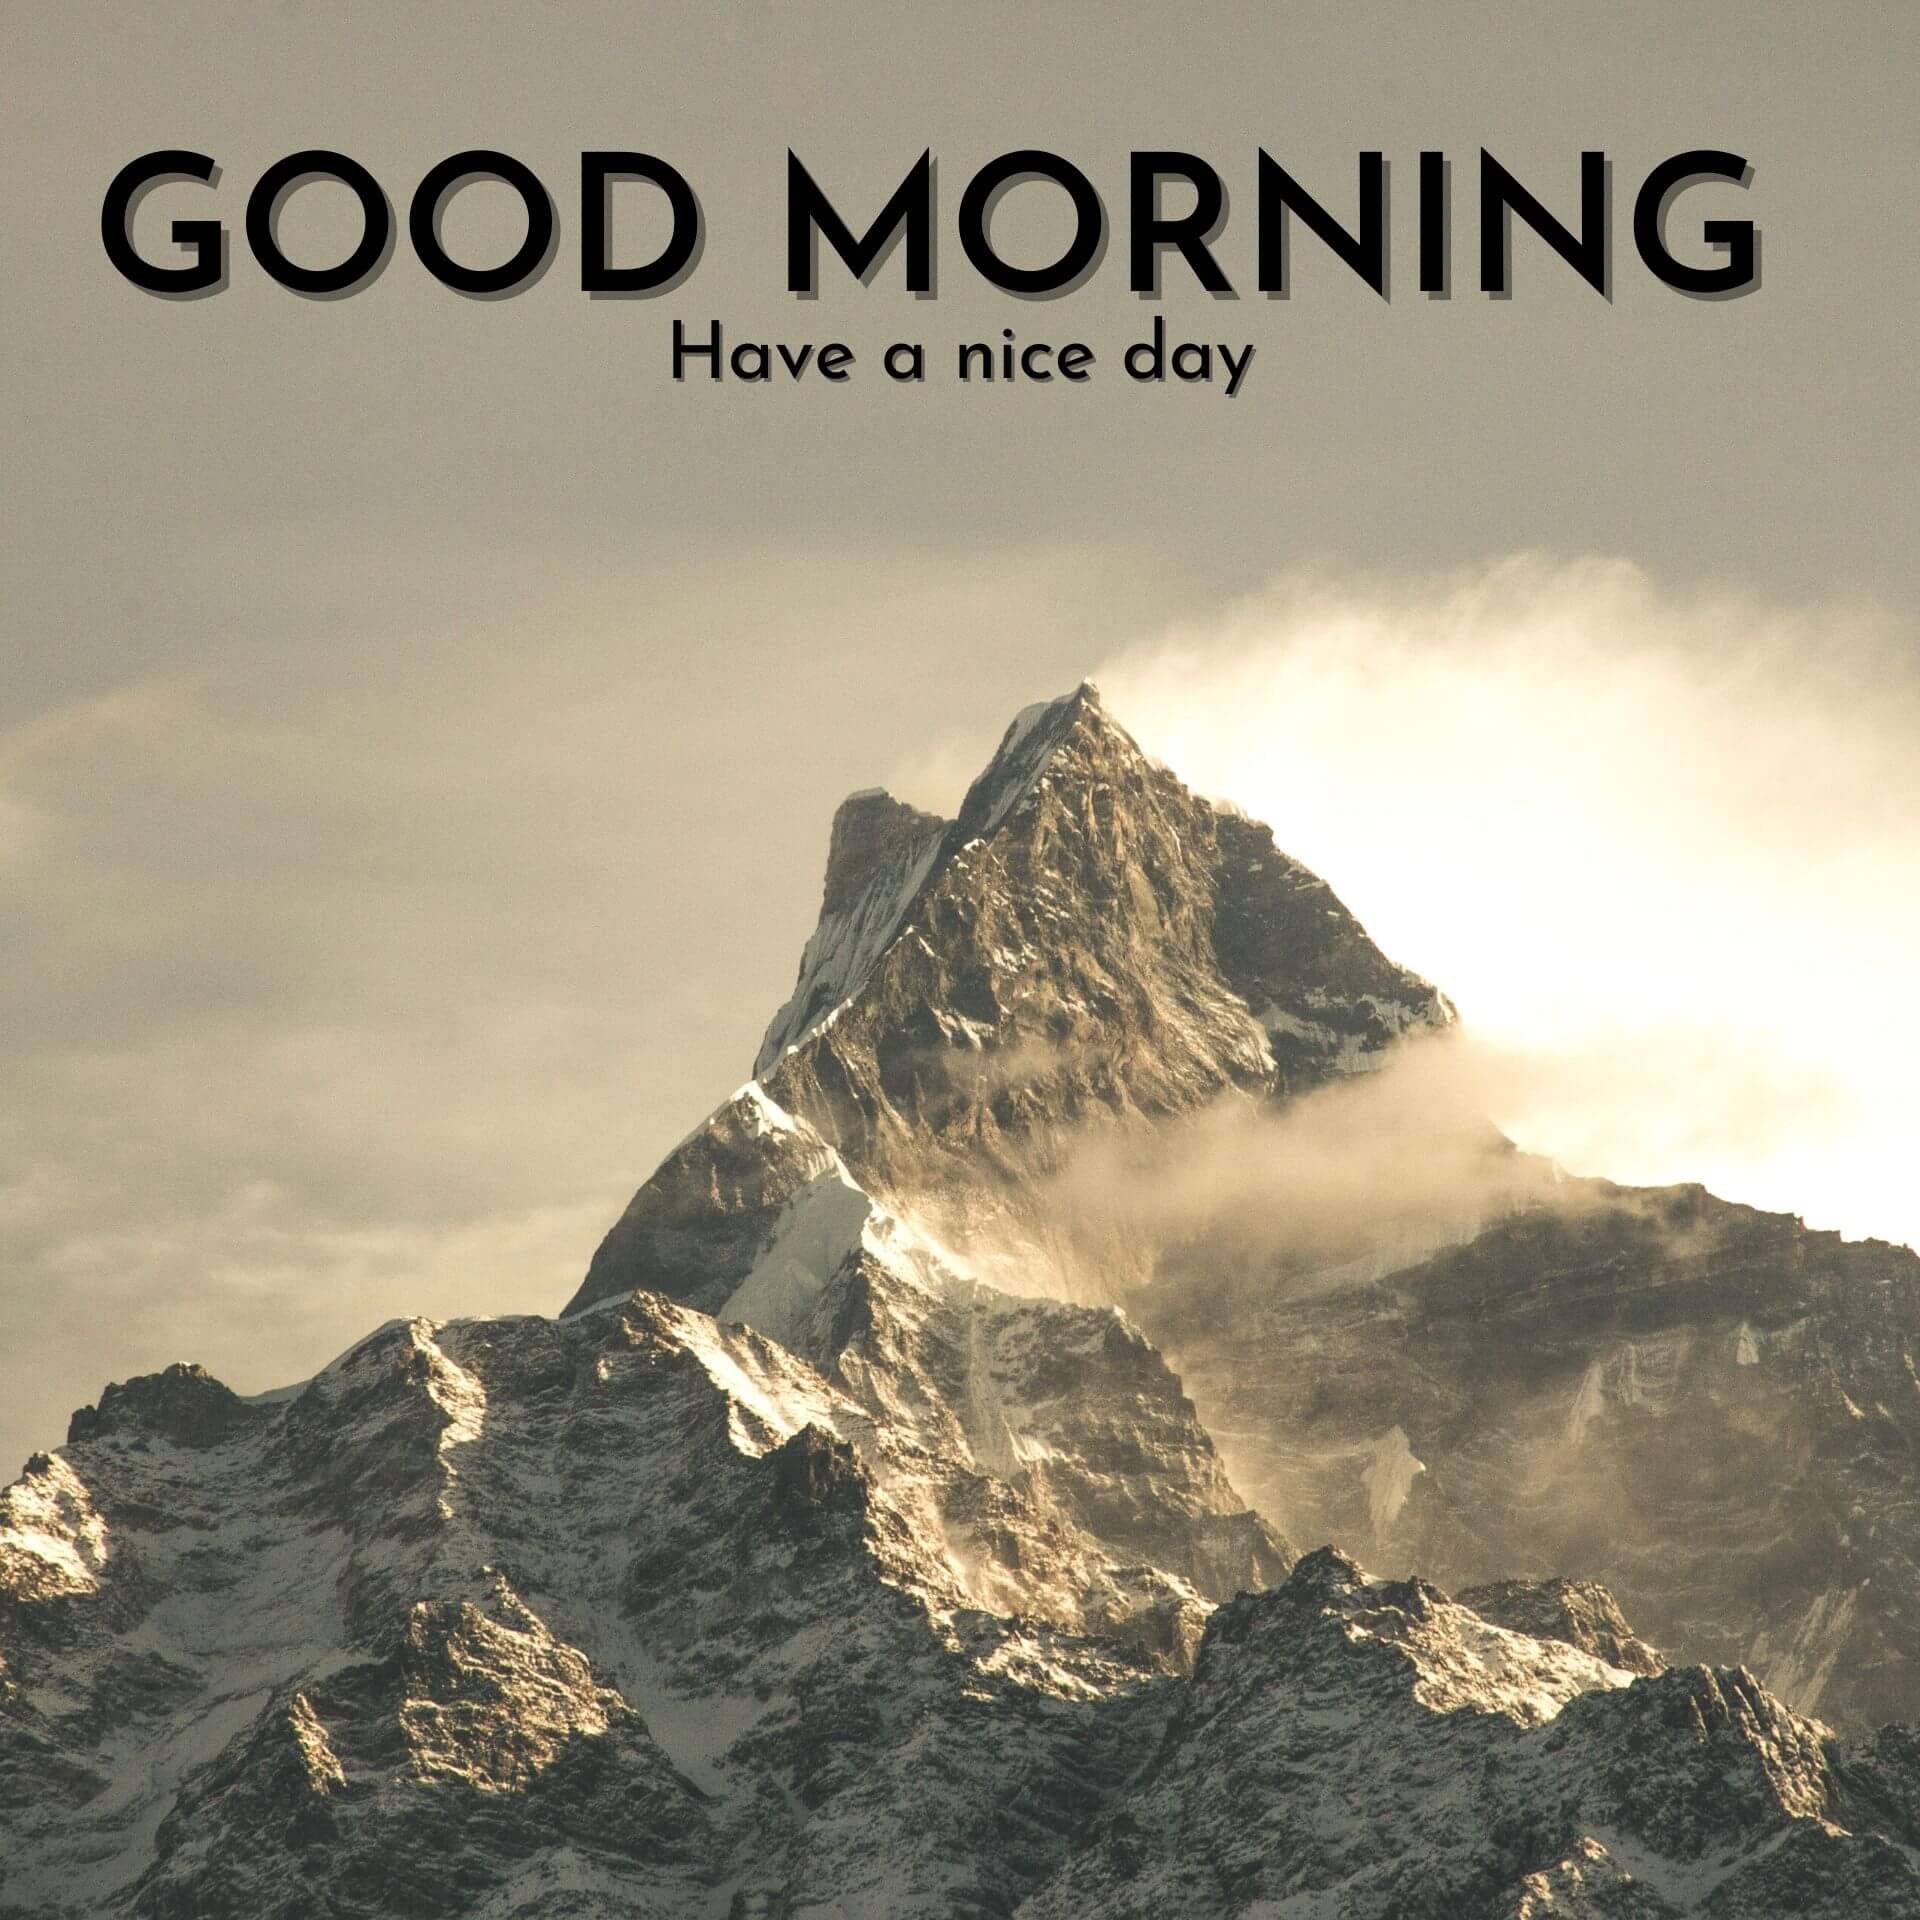 Good morning have a nice day Wallpaper Download